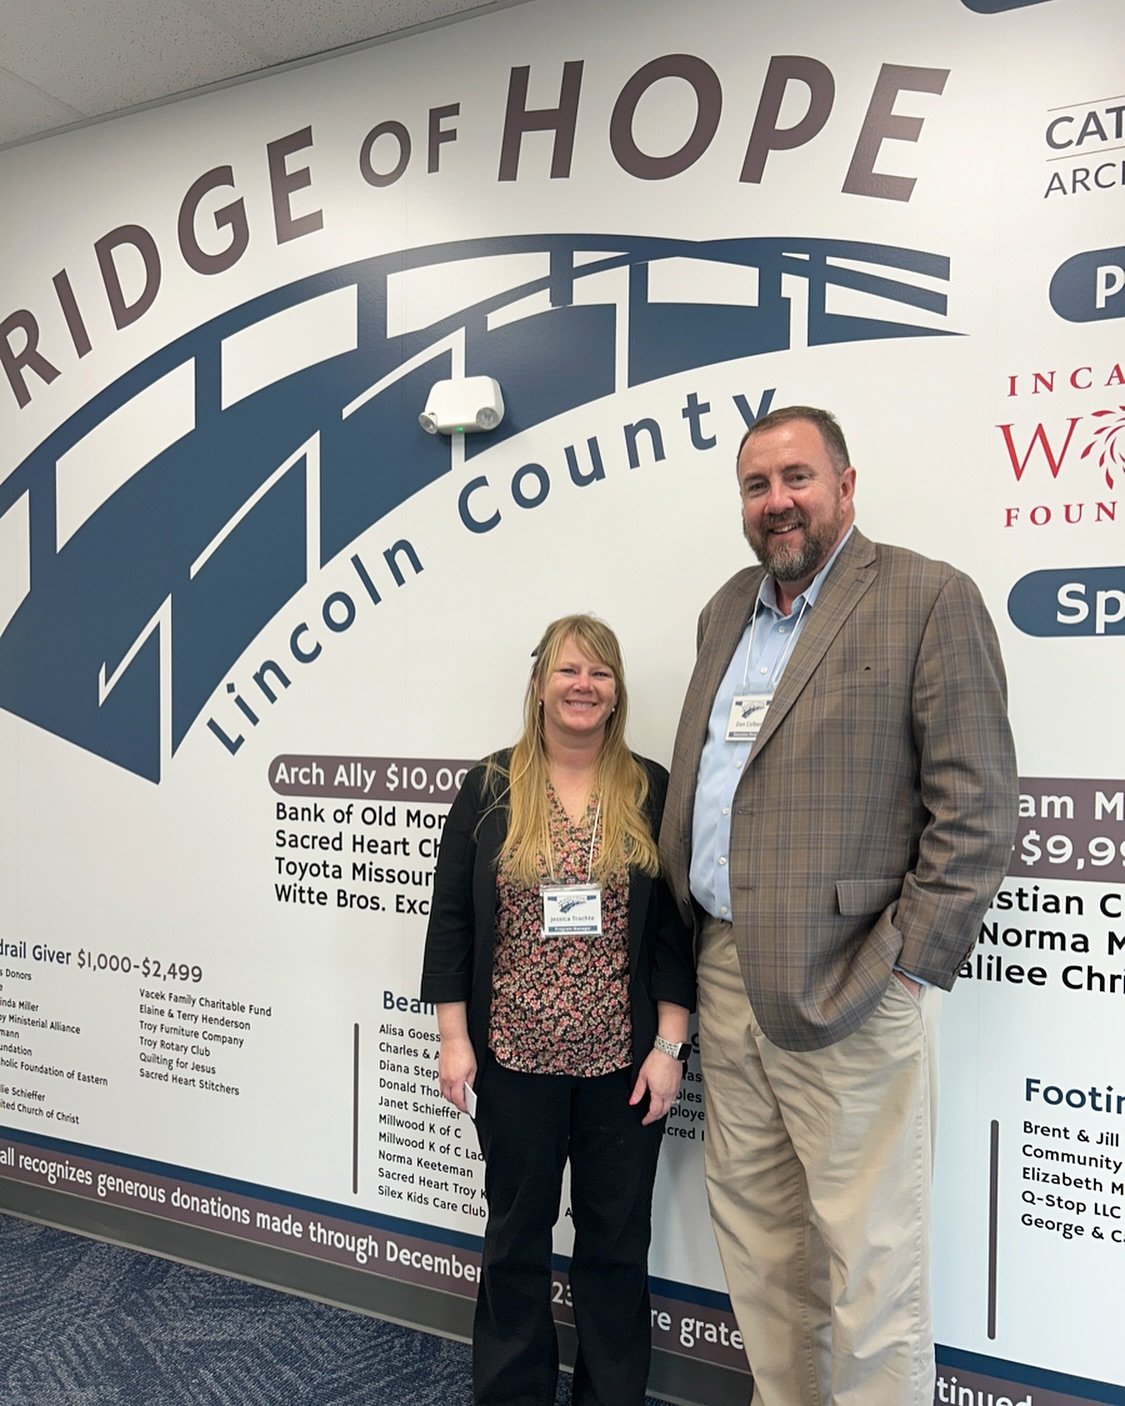 Meet our leadership team - Executive Director, Dan Colbert and Program Manager, Jessica Trachte.  Dan and Jessica have been integral in getting Bridge of Hope finished and ready to serve our community.  They both started in the fall of 2023 and hit t